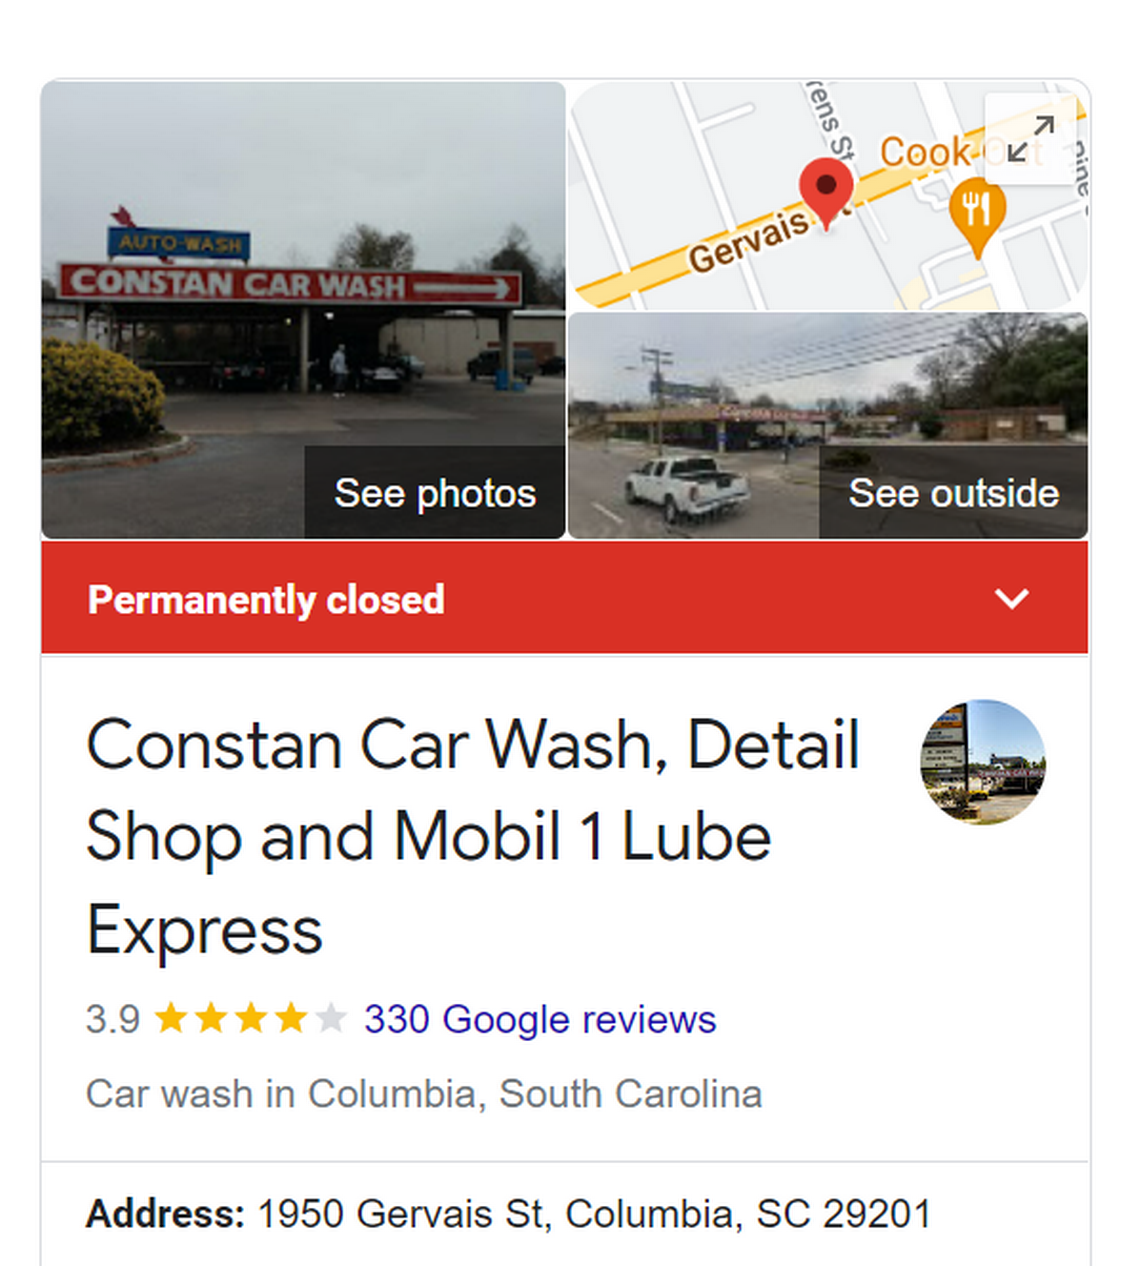 A Google listing for Constan Car Wash on Wednesday morning said the business was permanently closed.